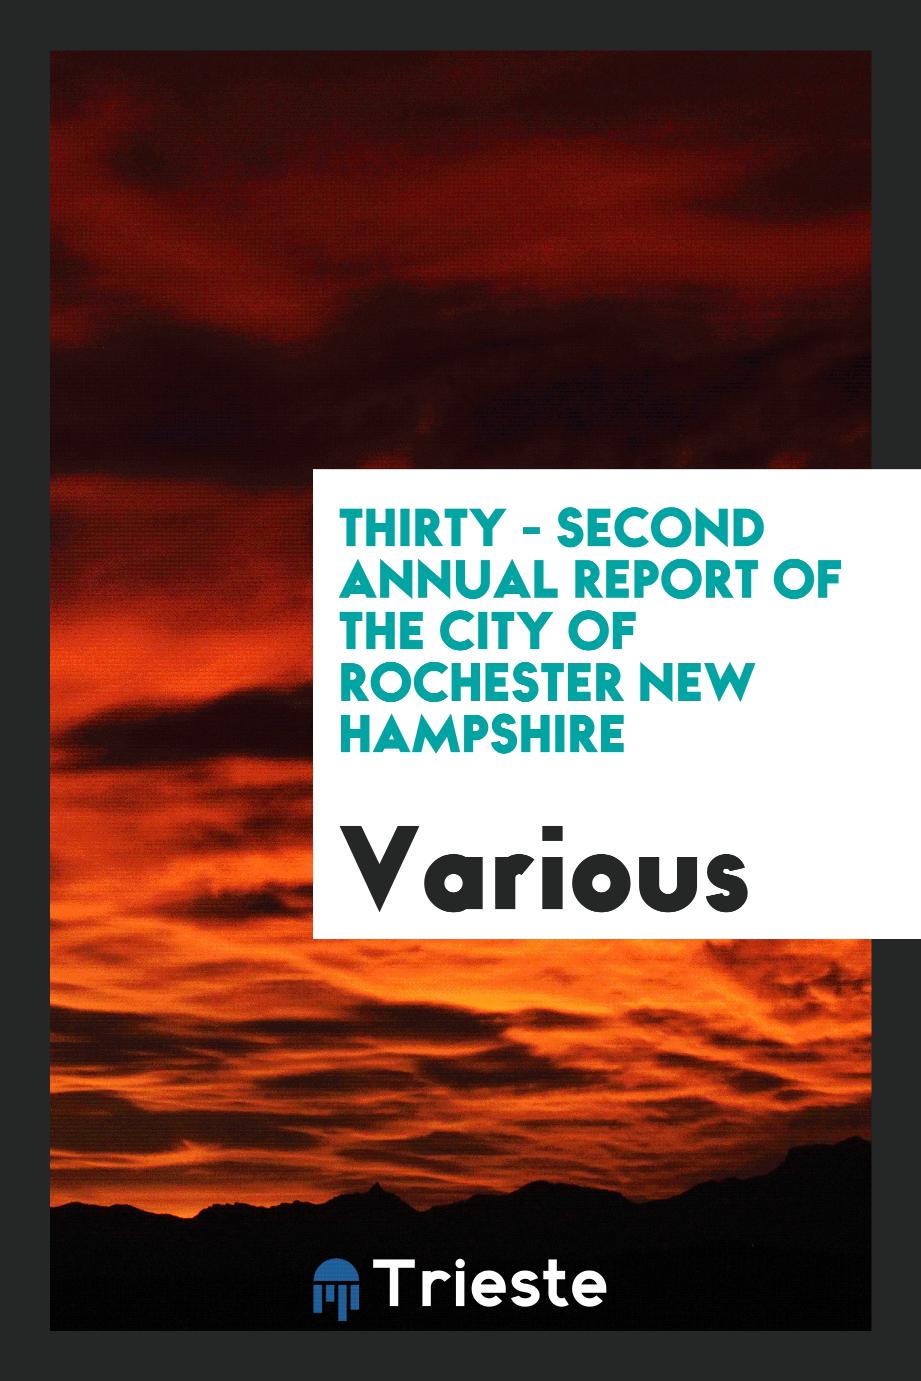 Thirty - Second Annual report of the City of Rochester New Hampshire